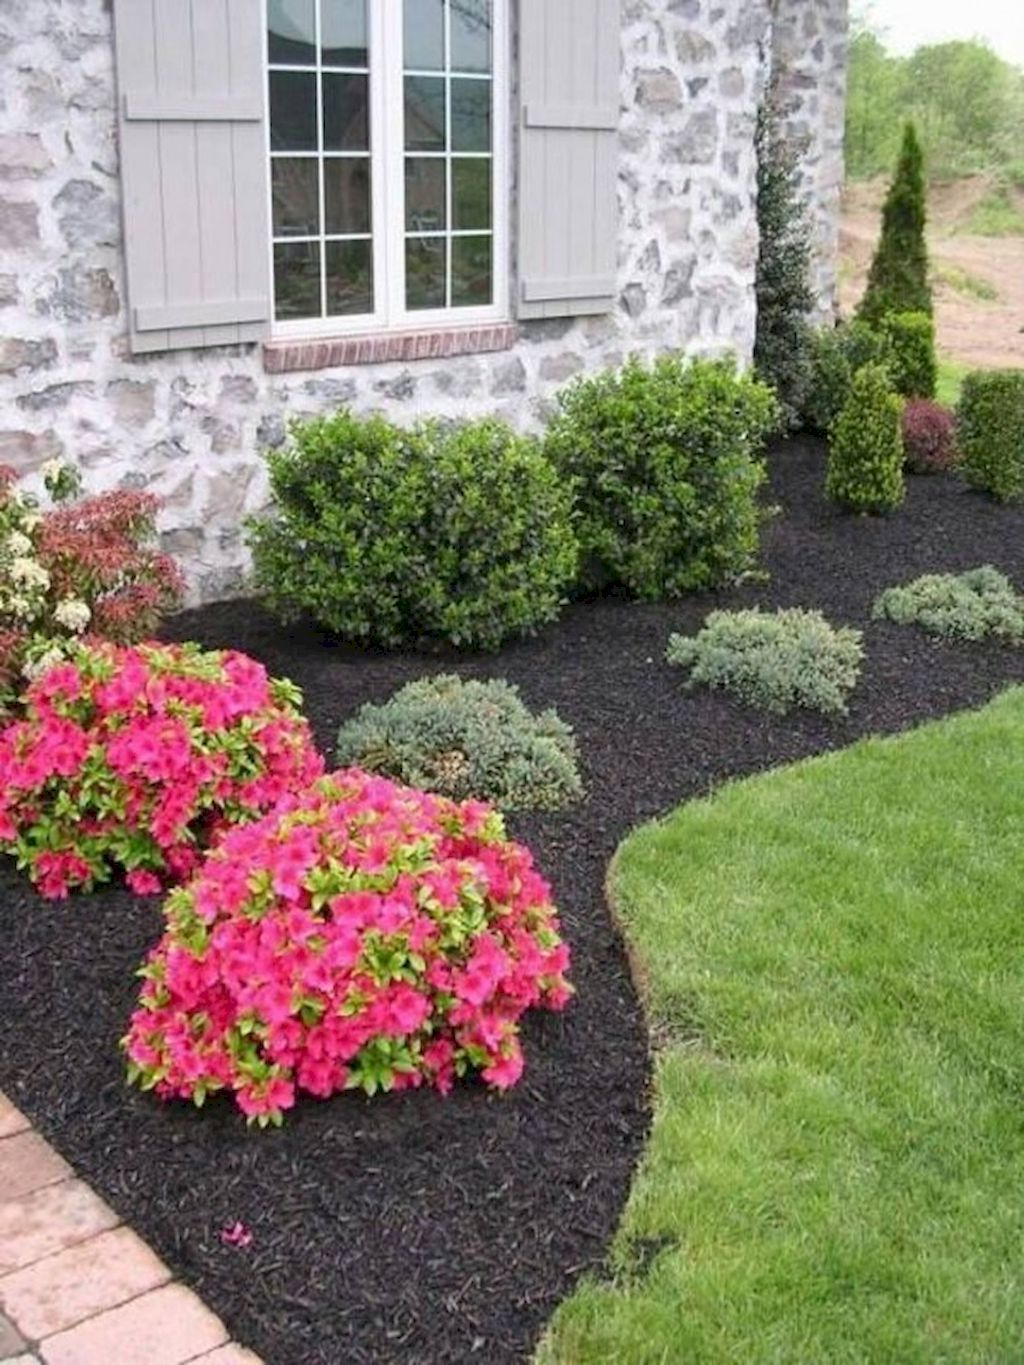 Fabulous Front Yard Lanscaping Ideas On A Budget 26 Outdoor Landscaping Yard Landscaping